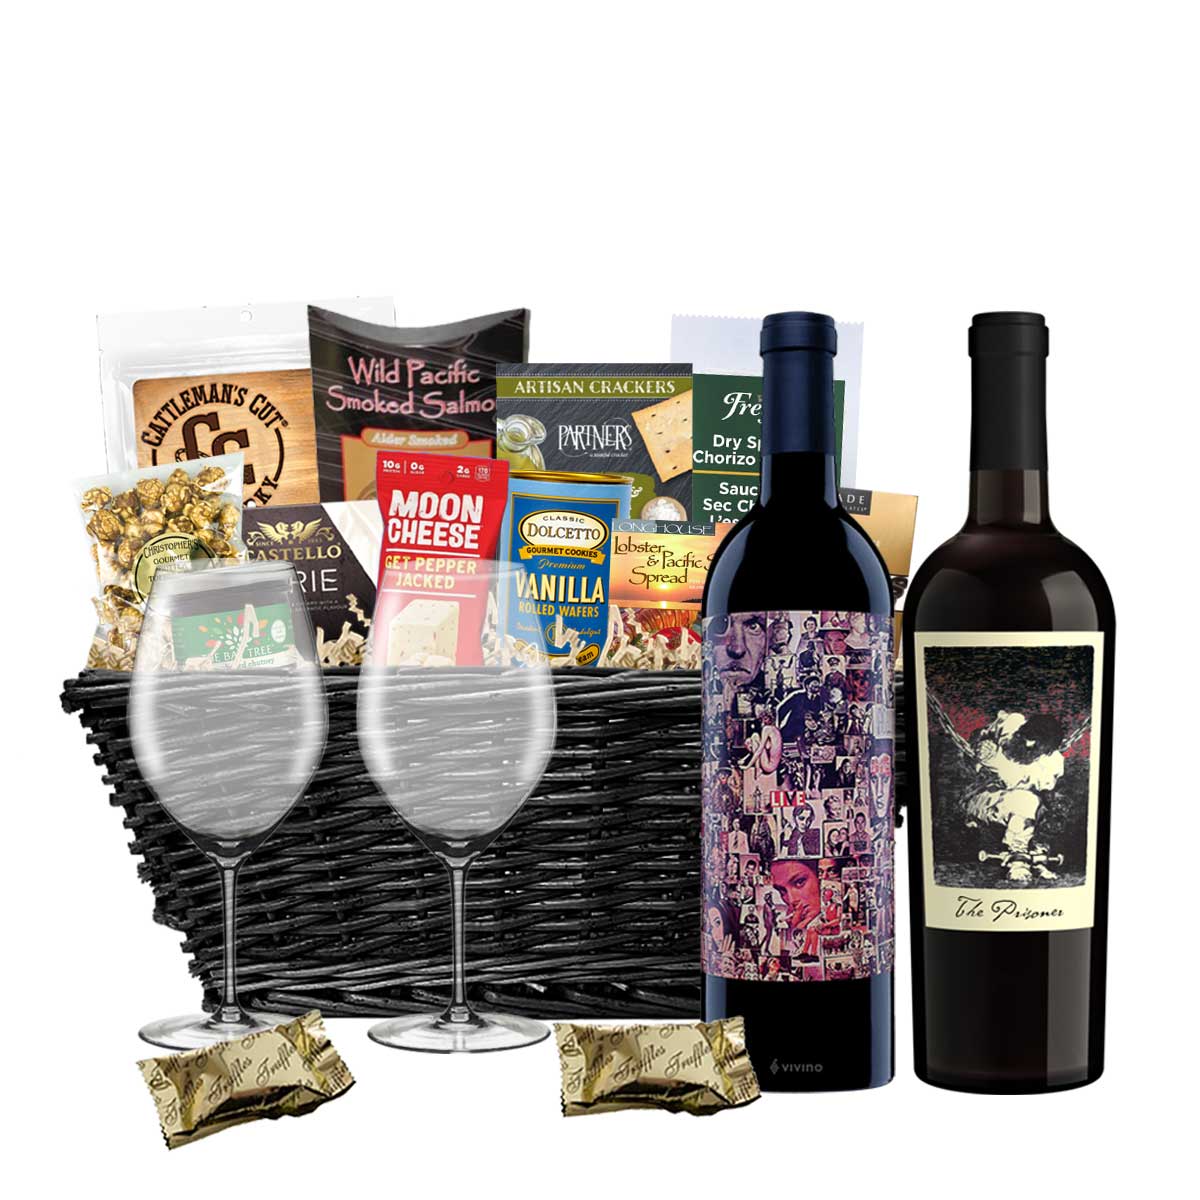 TAG Liquor Stores BC - Orin Swift Abstract & Orin Swift The Prisoner 750ml x 2 Gift Basket